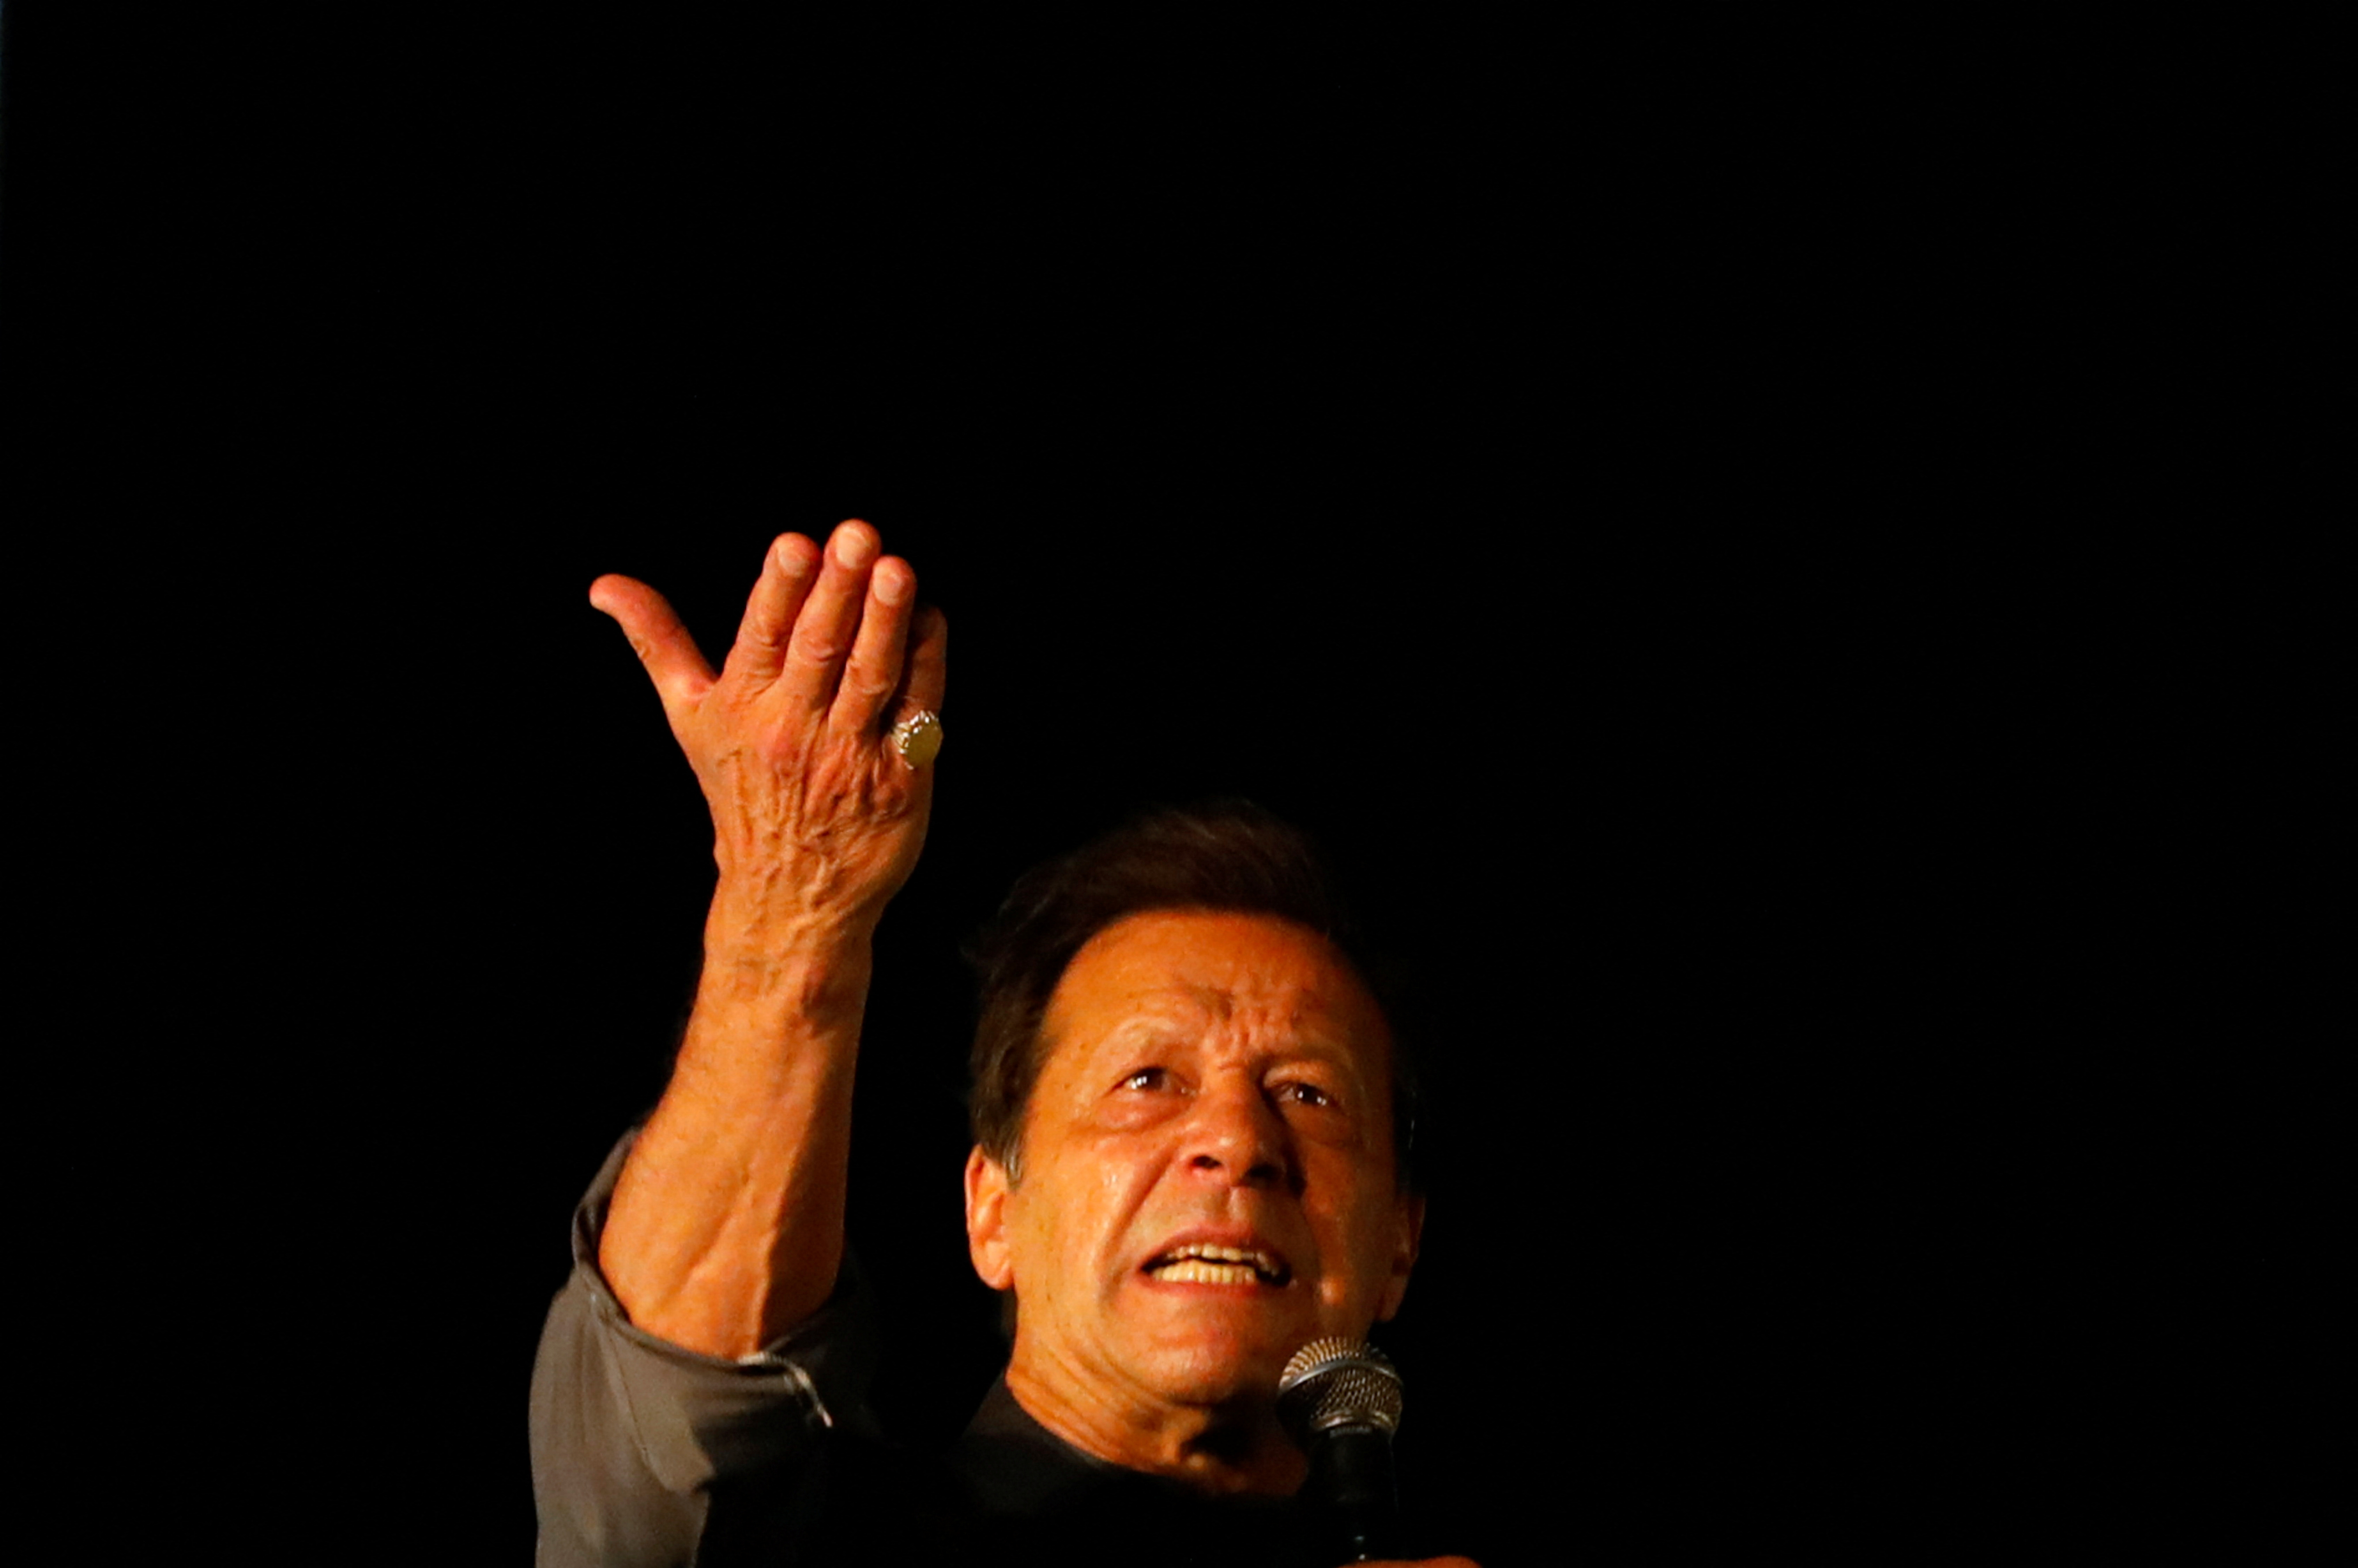 Ousted Pakistani Prime Minister Imran Khan gestures as he addresses supporters during a rally, in Karachi